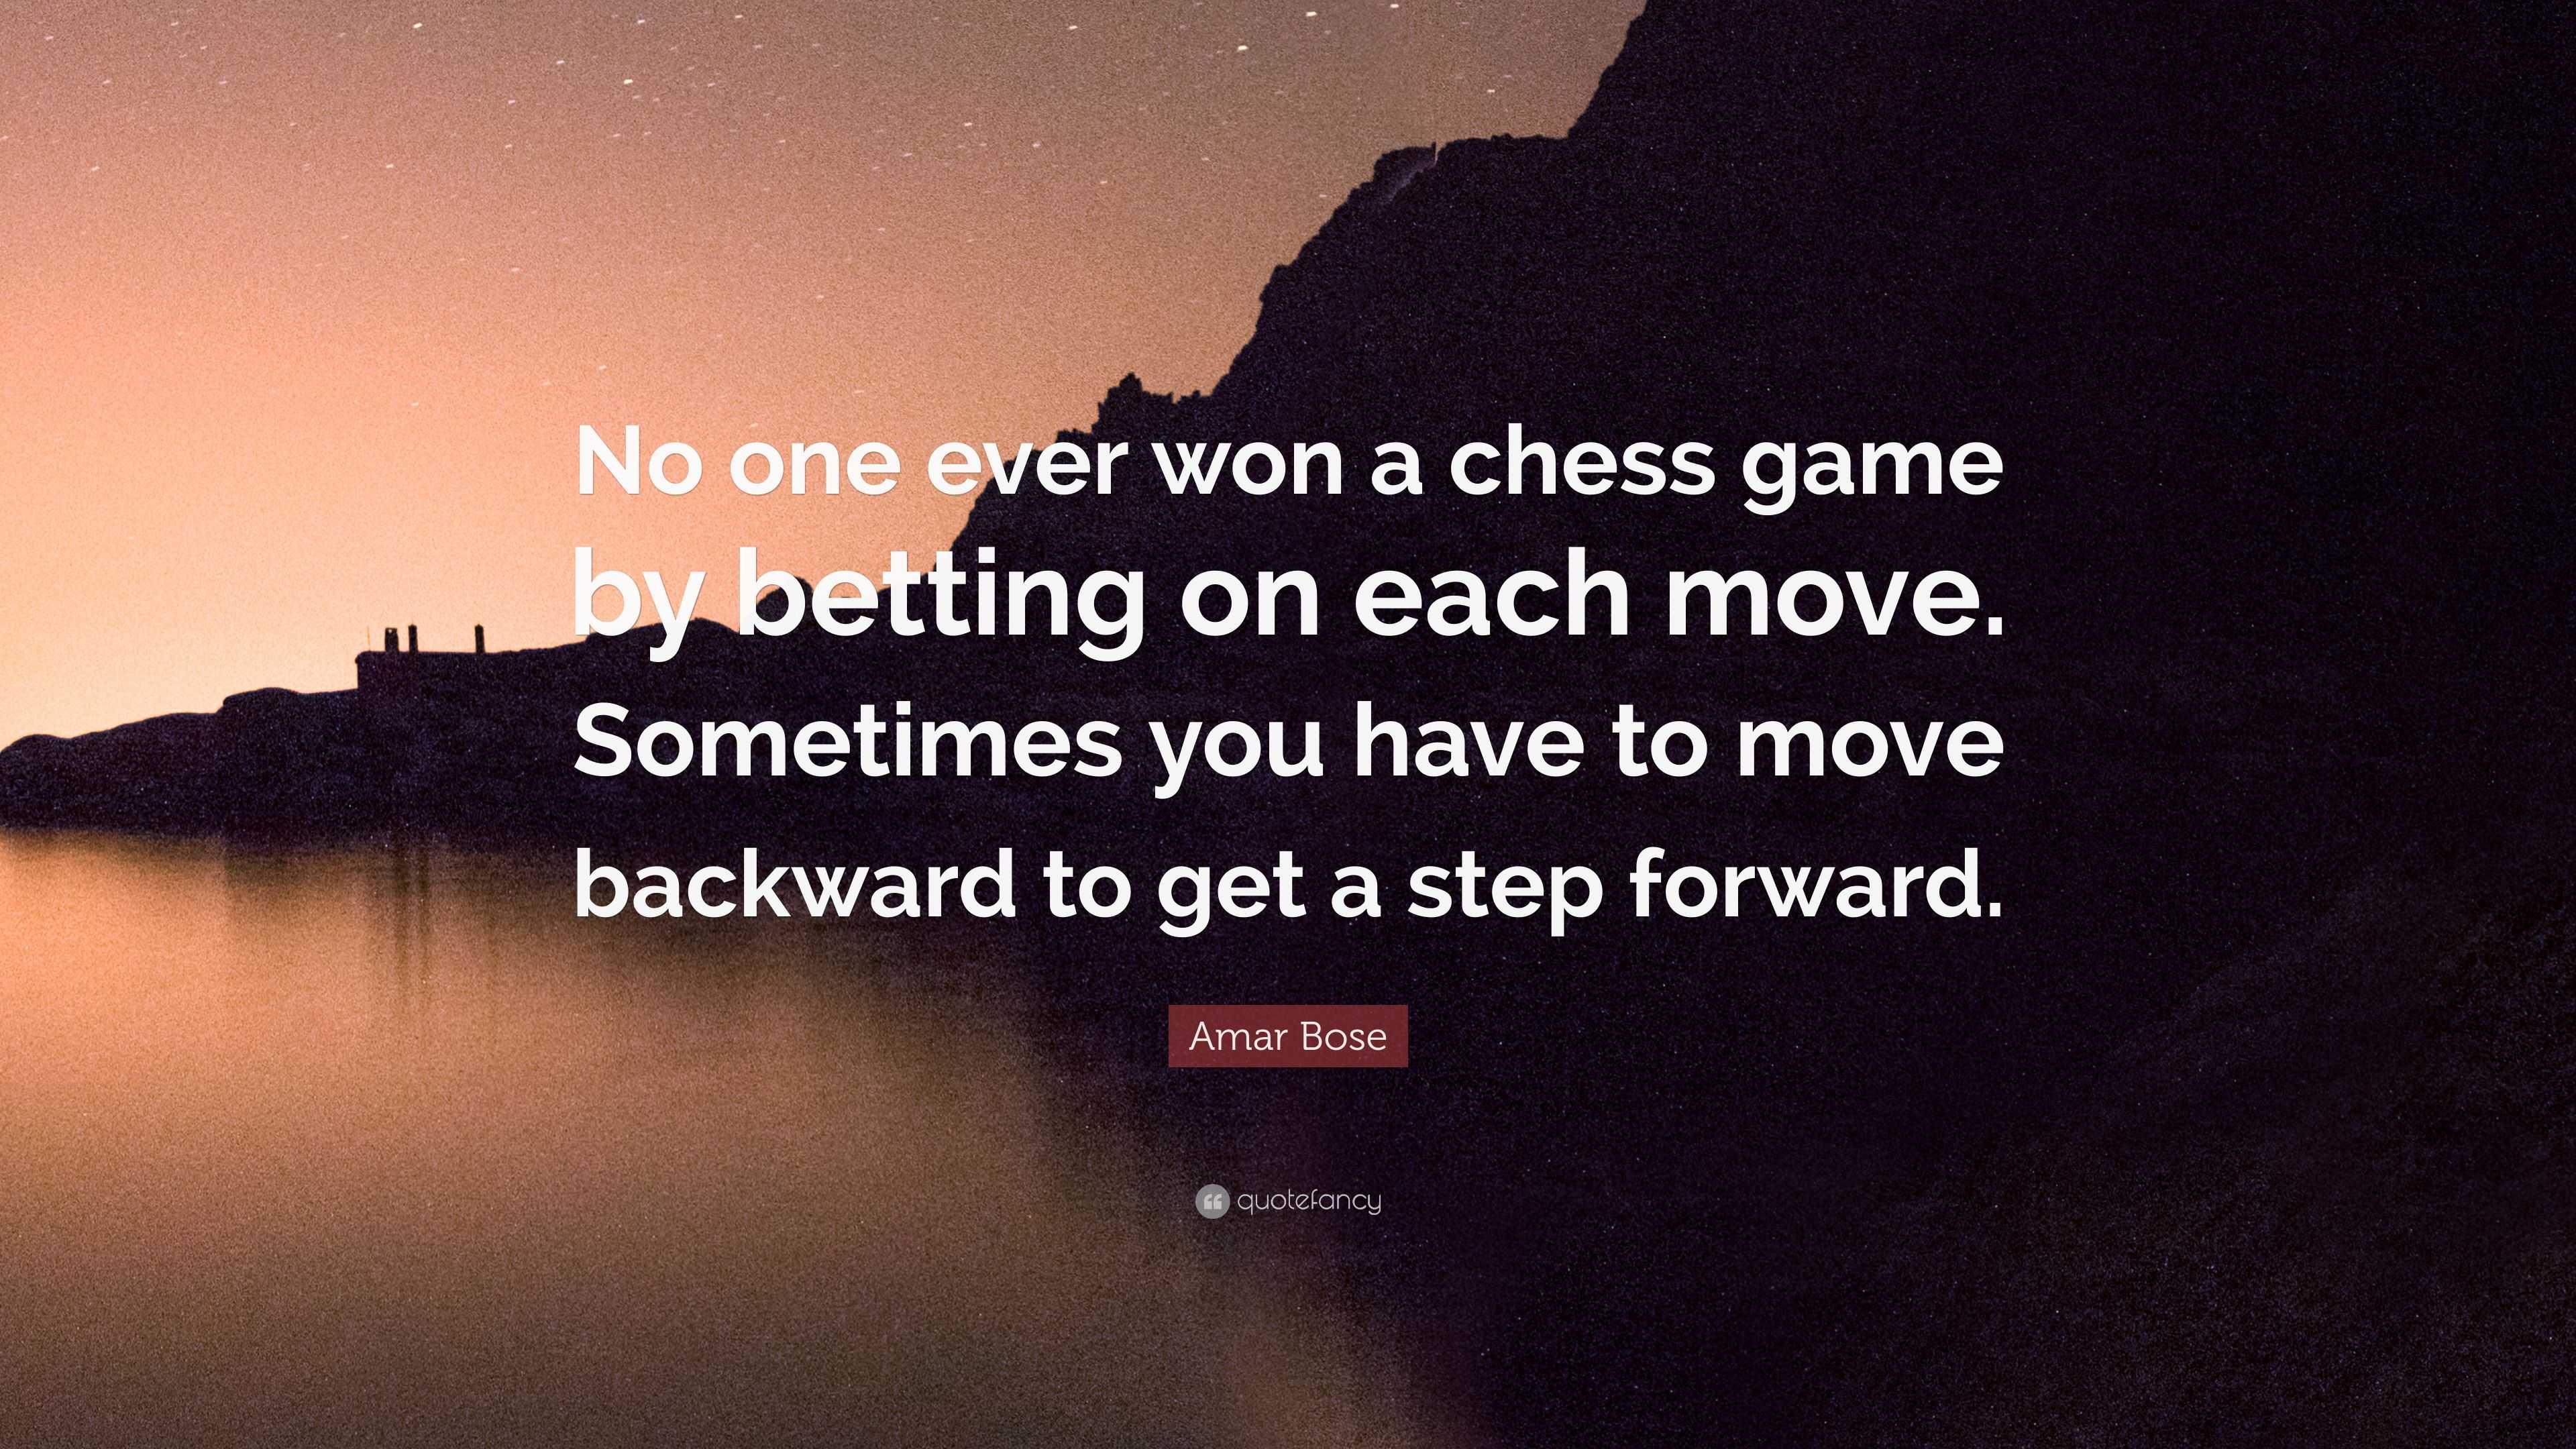 Inspiring Quotes - Be Positive on X: No one has ever won a game of chess  by only taking forward moves. Sometimes you have to move backwards to take  better steps forward.